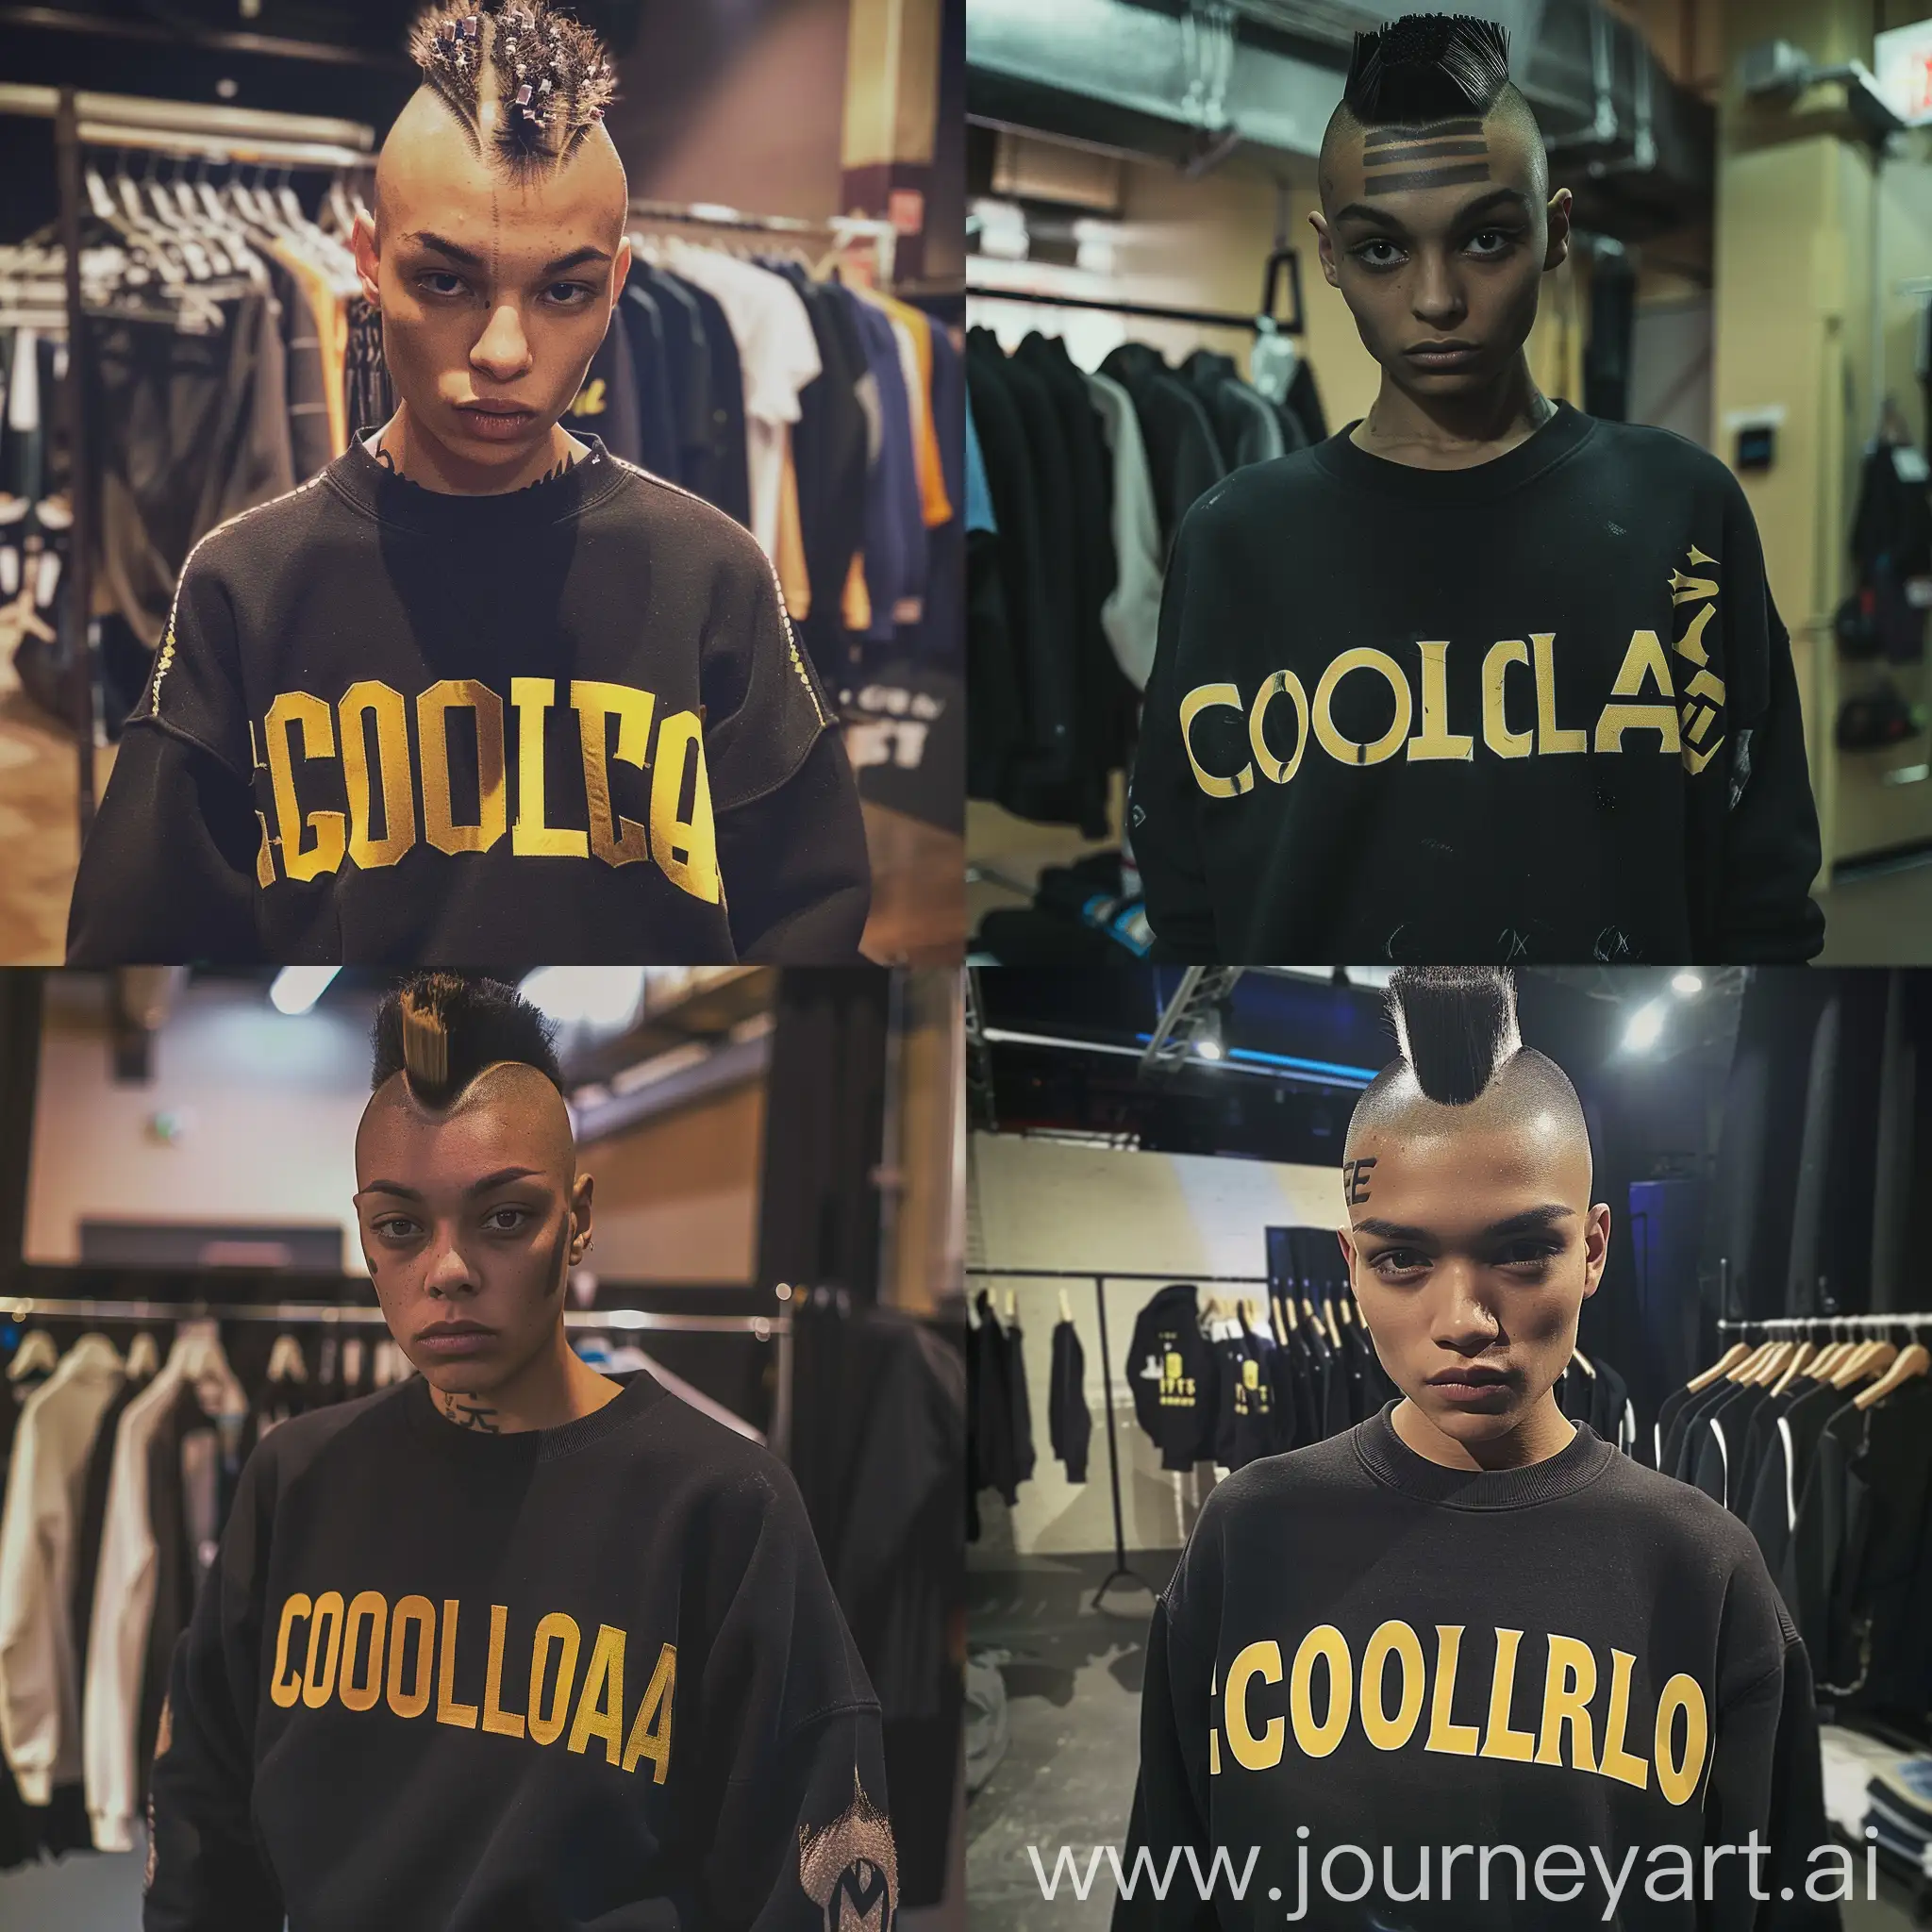 a young mab wearing a black sweatshirt with the word "COLORADO" in large, yellow and white block letters across the front. The individual has a unique hairstyle, with a shaved head and three darker stripes on top. In the background, there is a clothes rack with hangers and some items of clothing. The setting appears to be indoors, possibly backstage at an event or in a fitting room. The person in the image has a serious expression on their face.